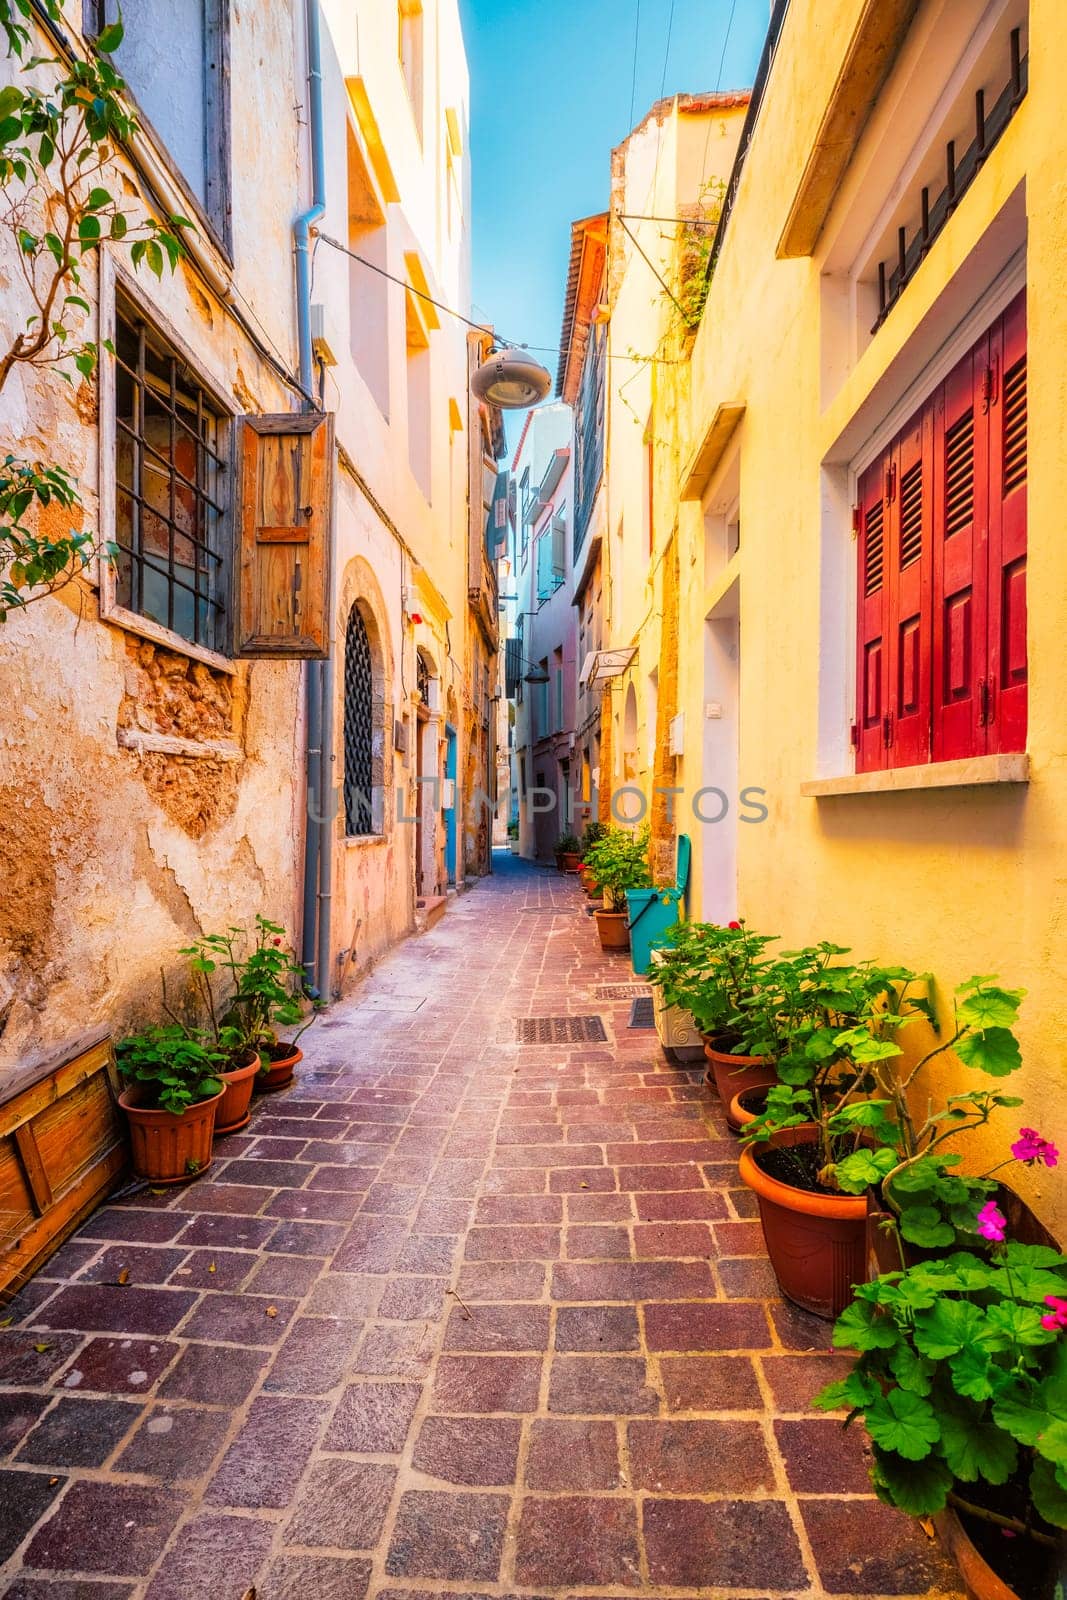 Scenic picturesque streets of Chania venetian town. Chania, Creete, Greece by dimol